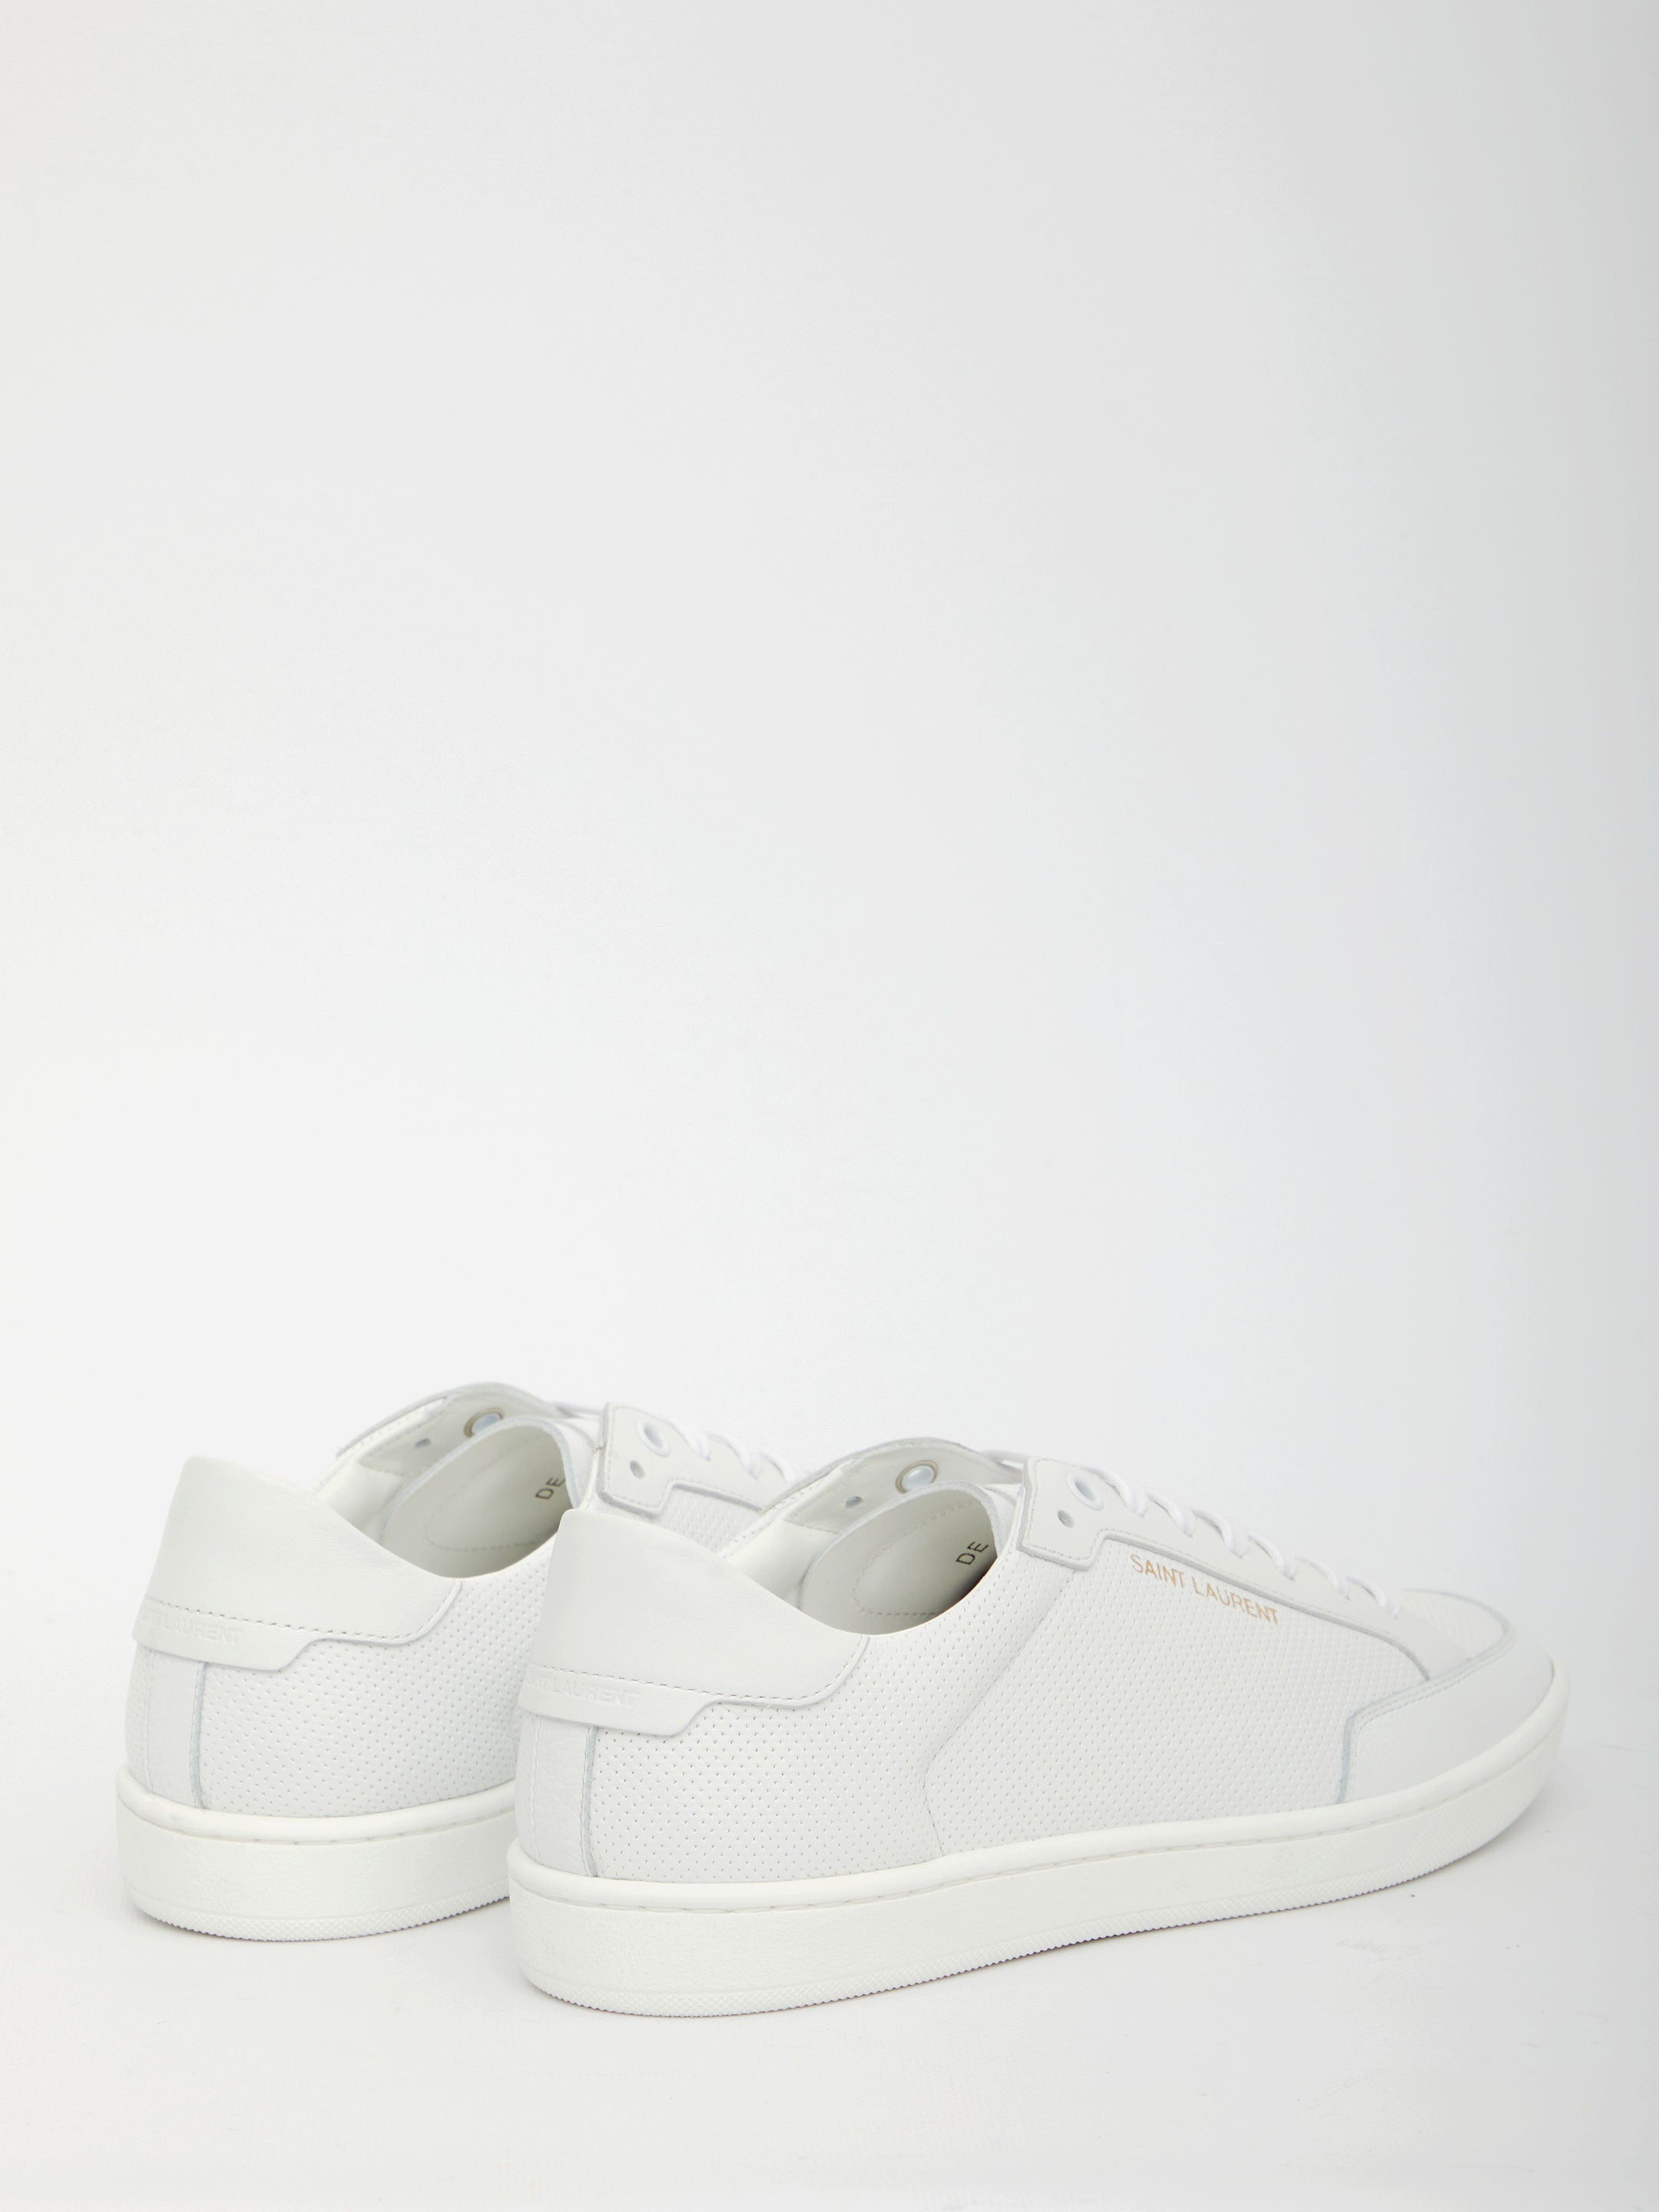 SAINT-LAURENT-OUTLET-SALE-Court-Classic-SL10-sneakers-Sneakers-ARCHIVE-COLLECTION-3.jpg